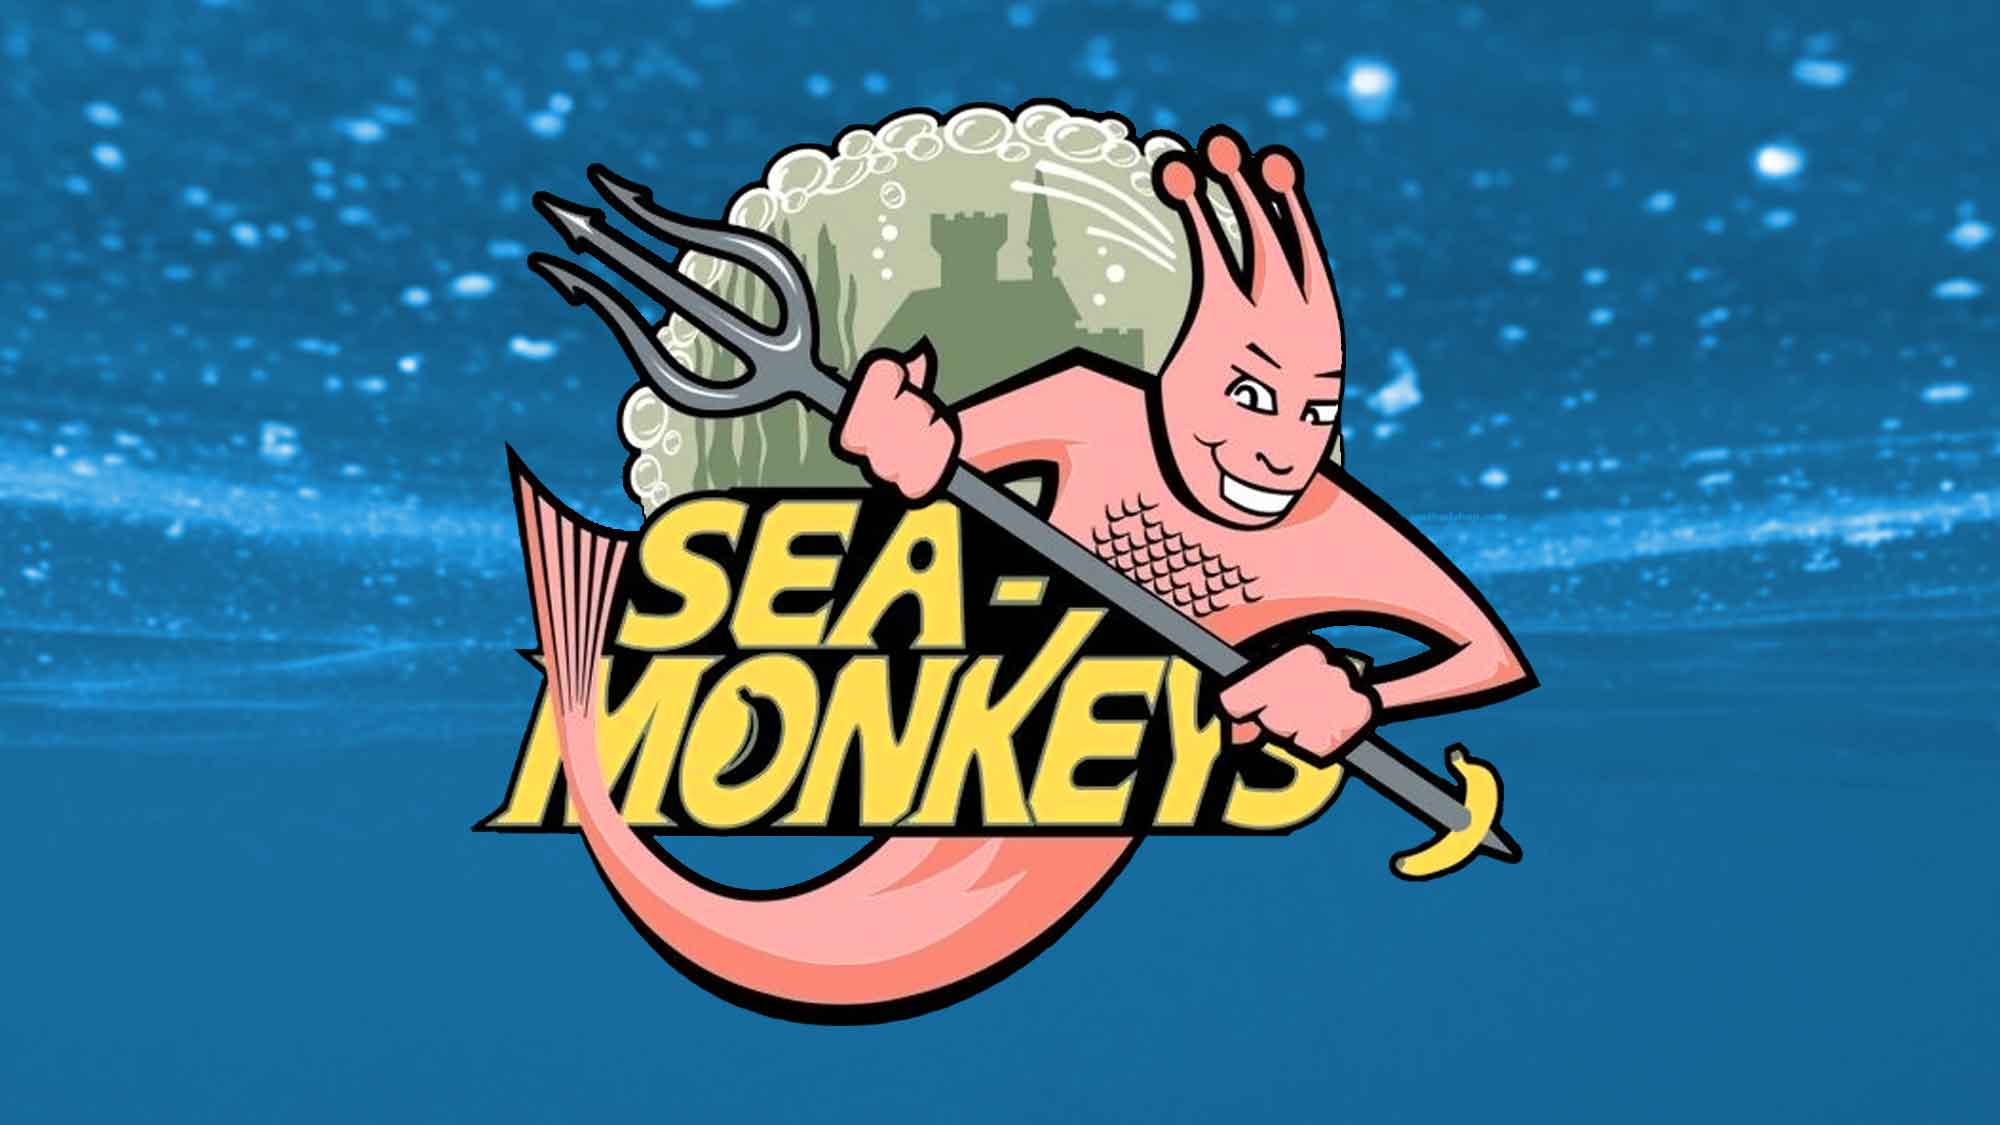 18 Weird Facts About Sea-Monkeys You Won't Believe Are True, Including Their Connection To The Ku Klux Klan